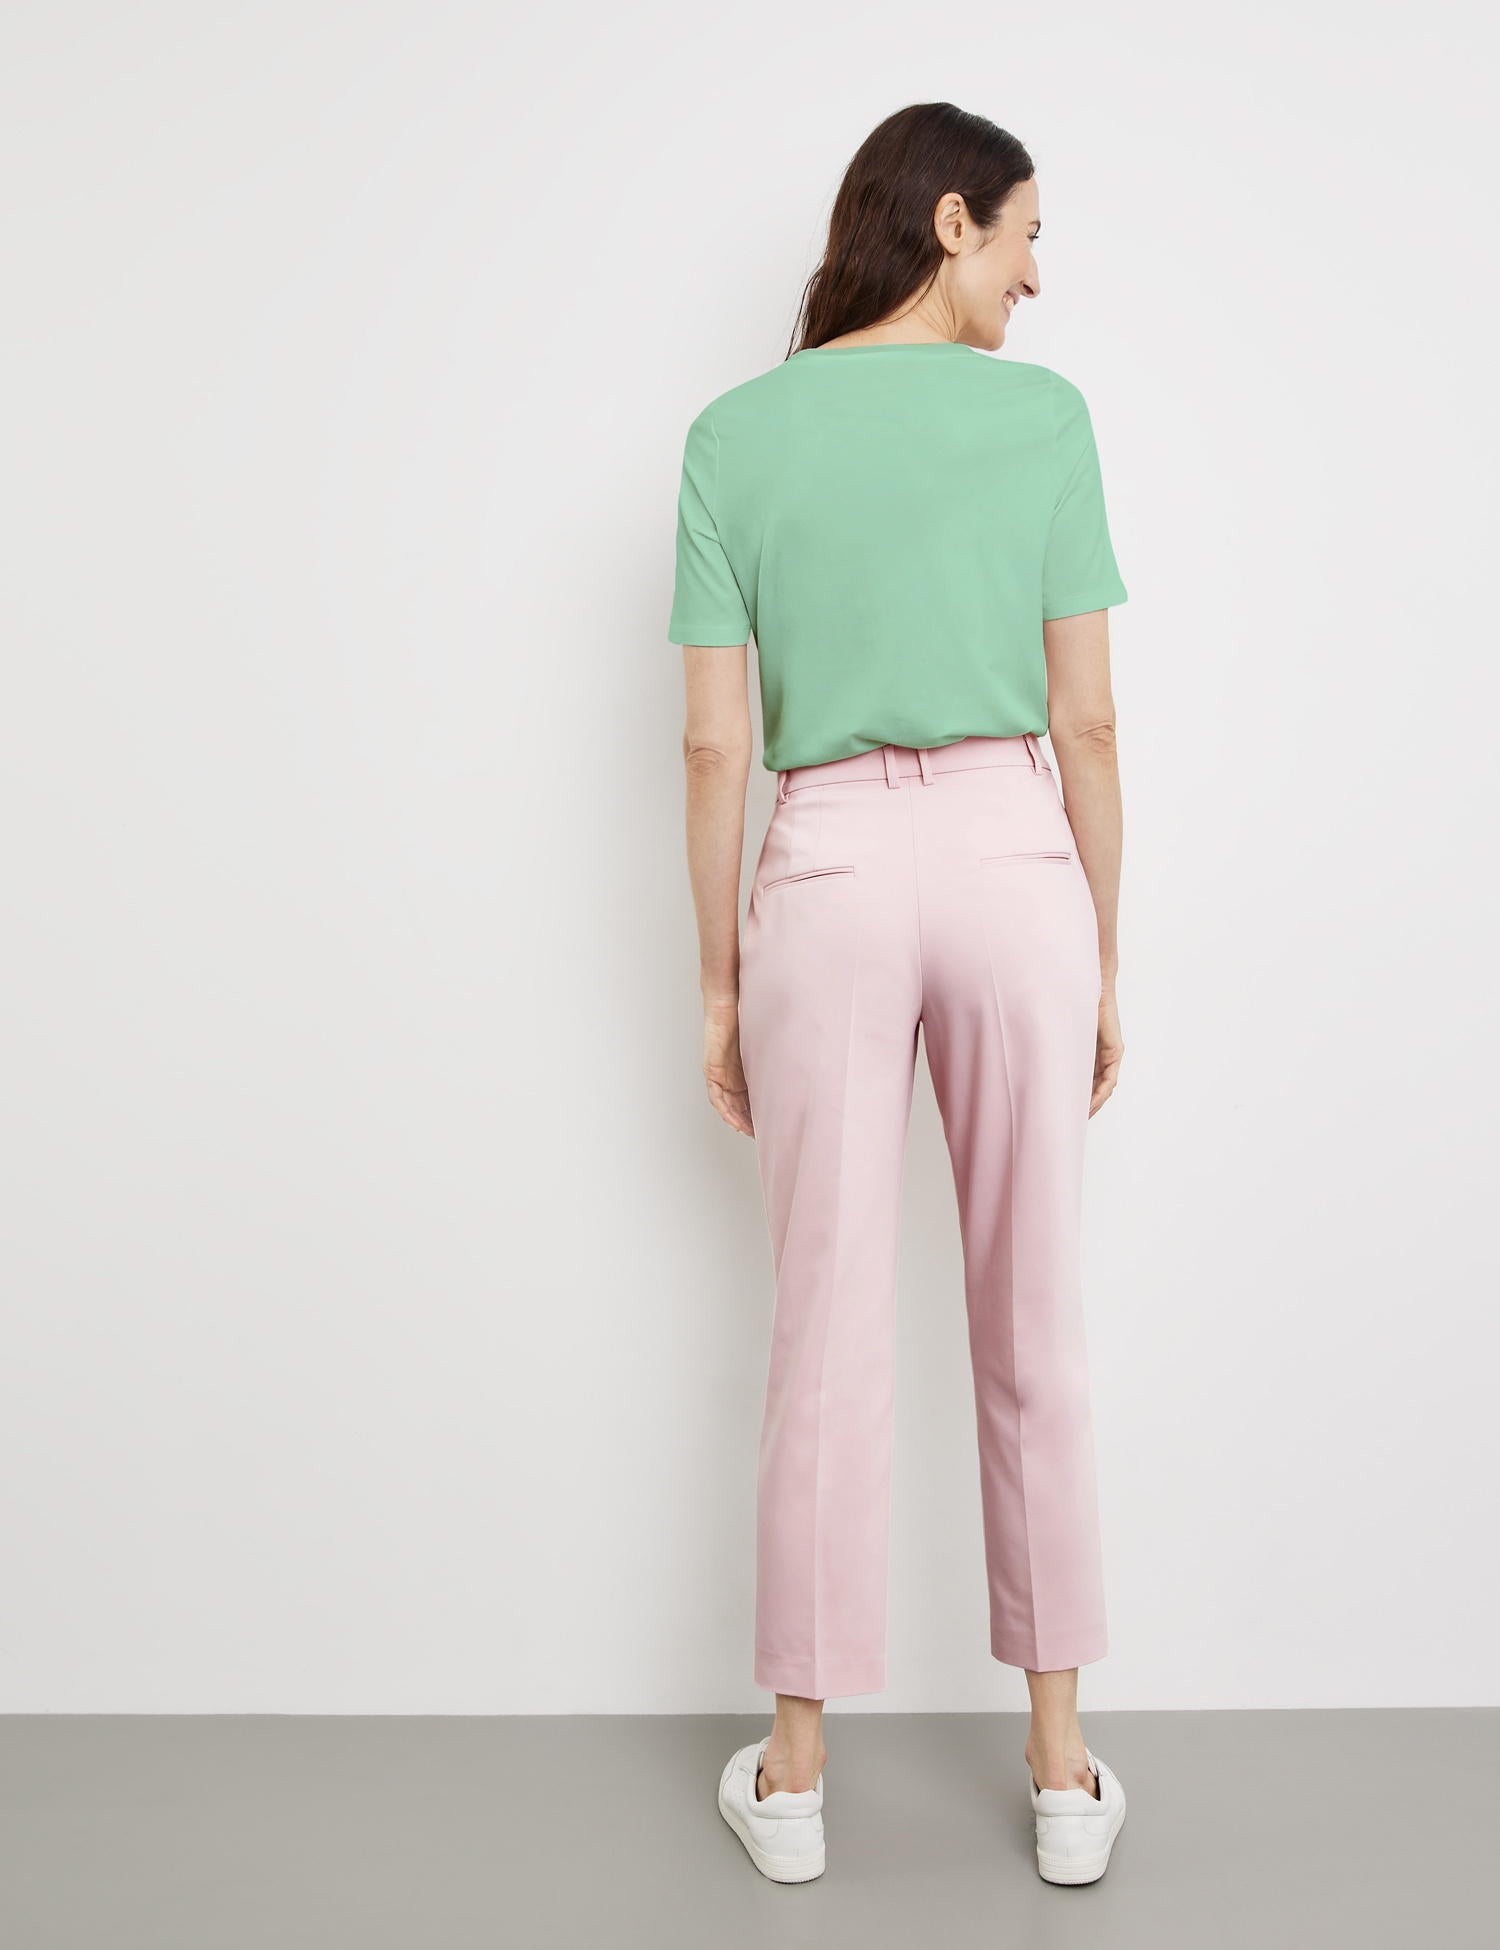 Elegant Trousers With Pressed Pleats_320006-31335_30289_06